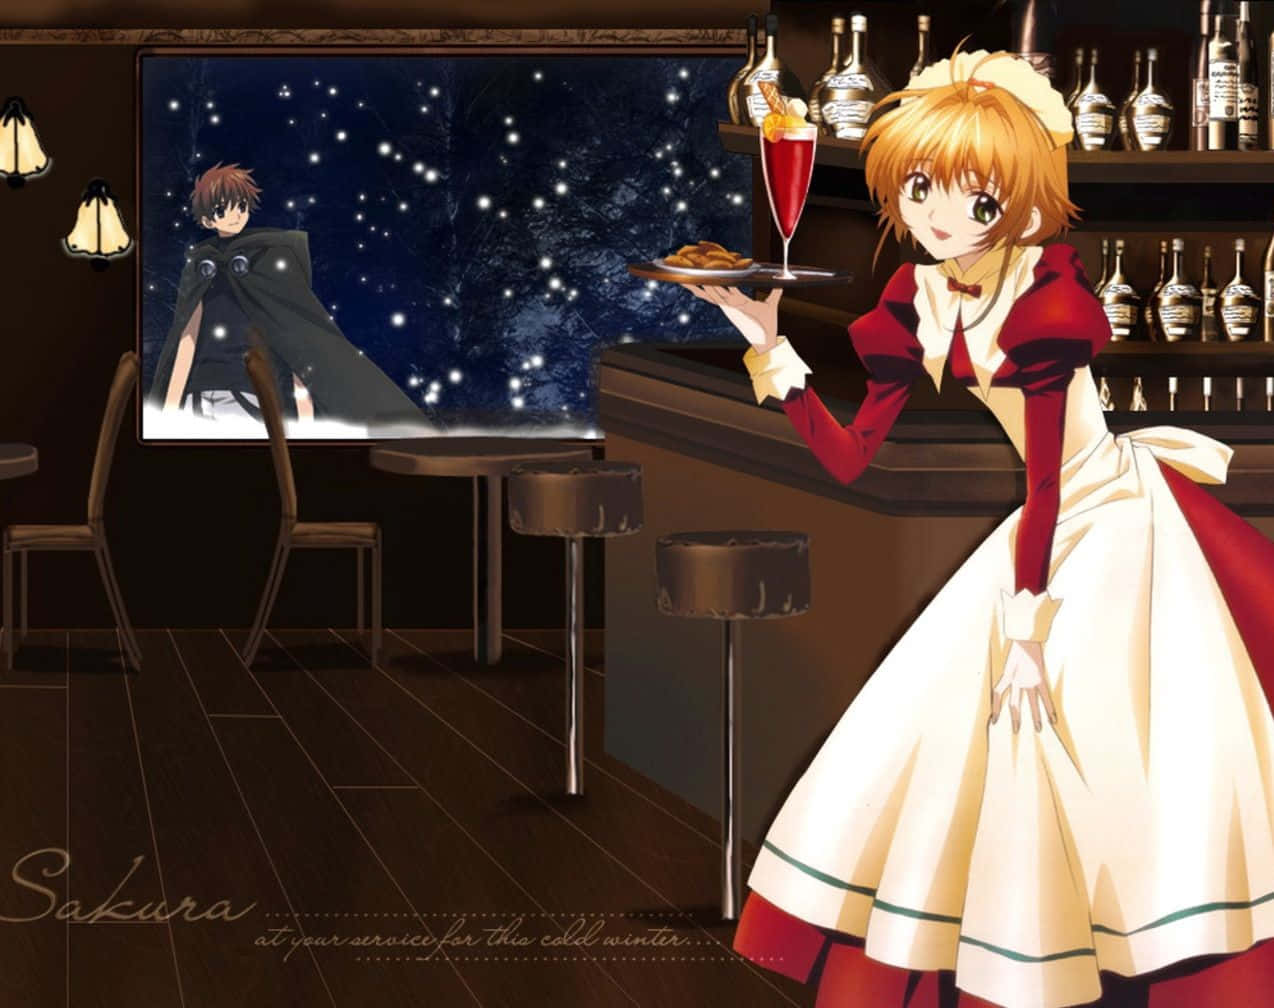 Enjoy an energizing cup of coffee while taking in the comforting views of any Cafe Anime. Wallpaper